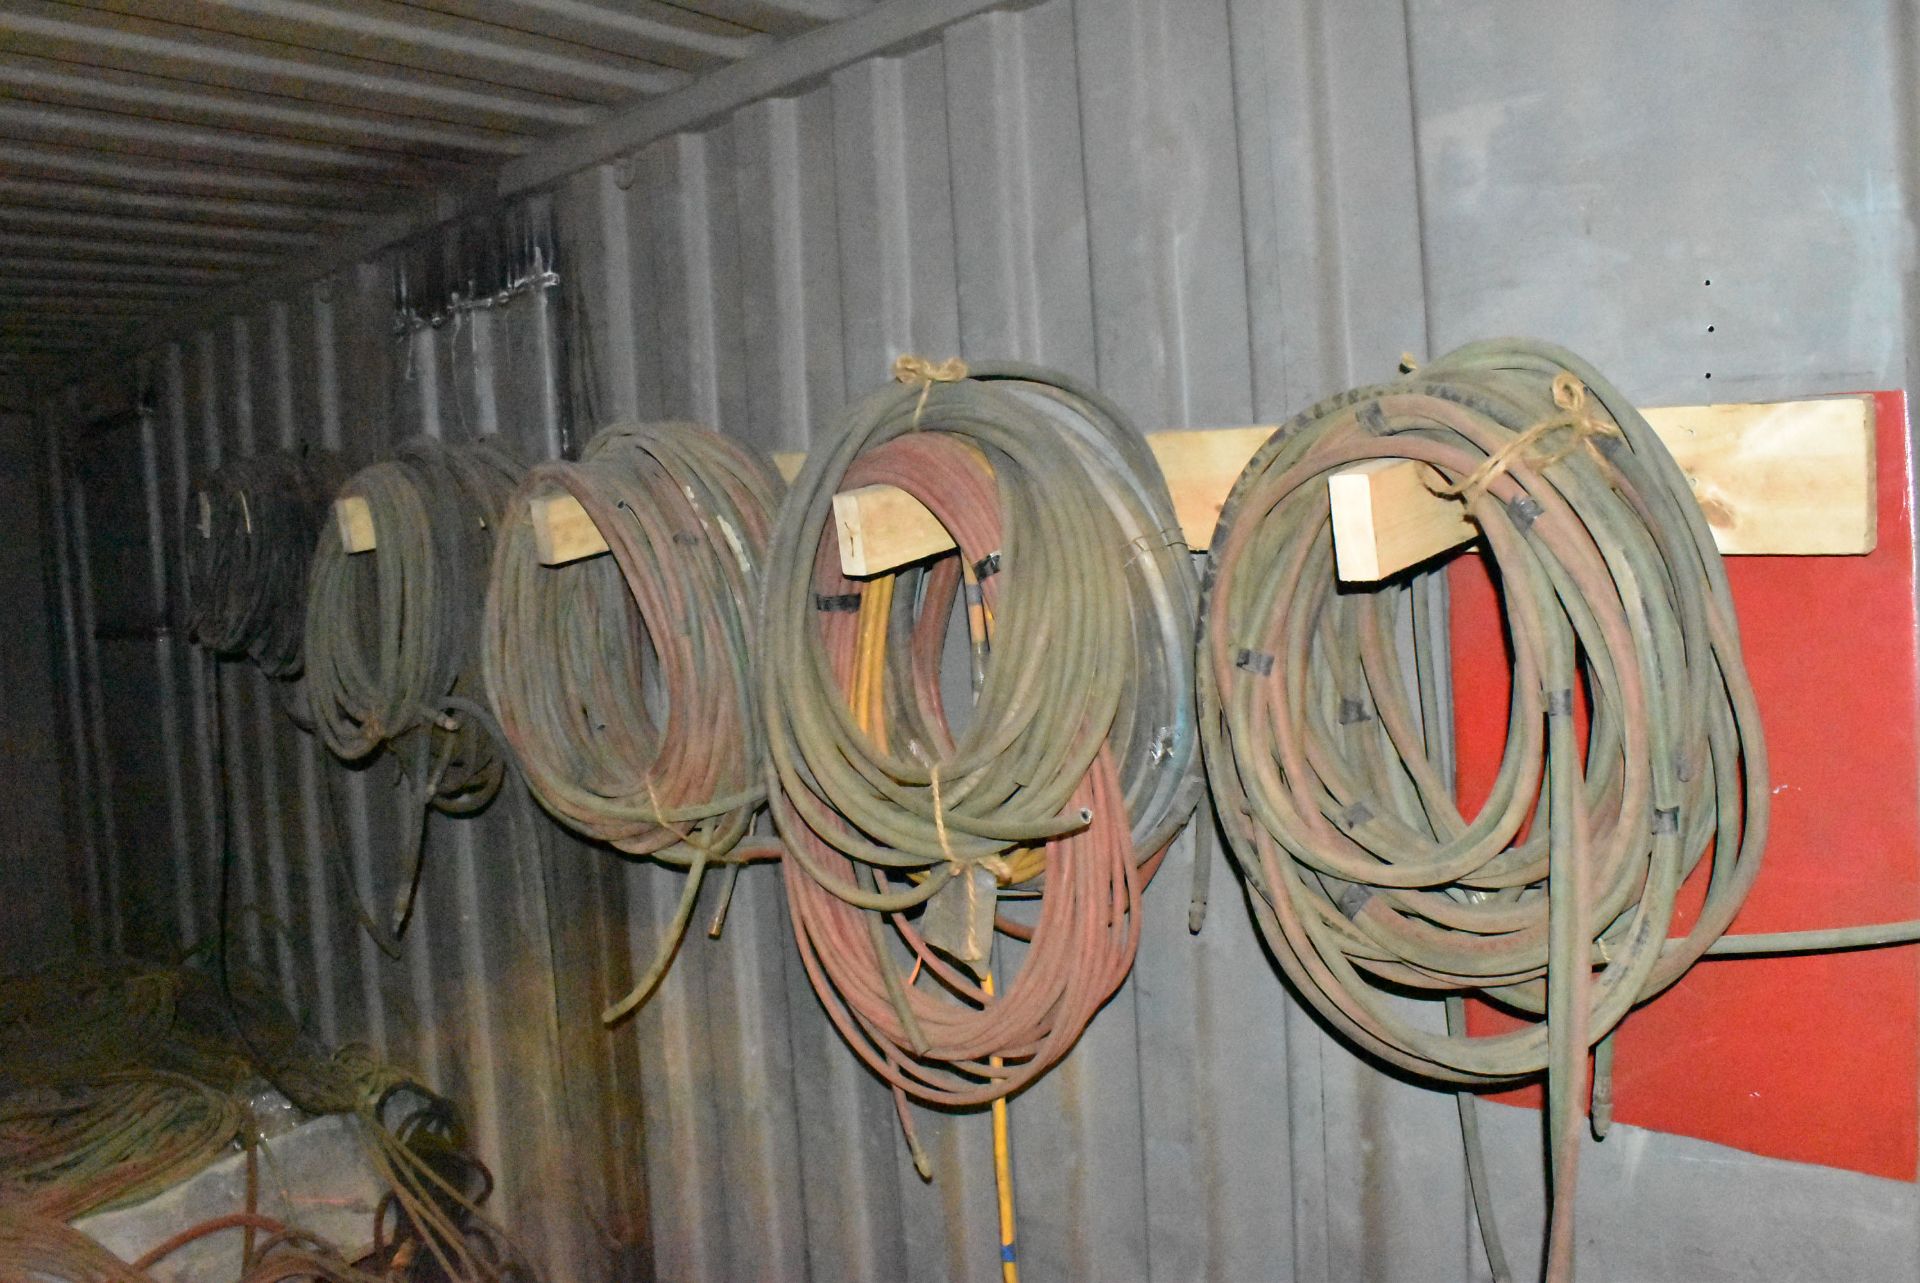 LOT/ CONTENTS OF CONTAINER - PNEUMATIC HOSE, HYDRAULIC HOSE, WELDING CABLES, OXY-ACETYLENE HOSE - Image 3 of 4